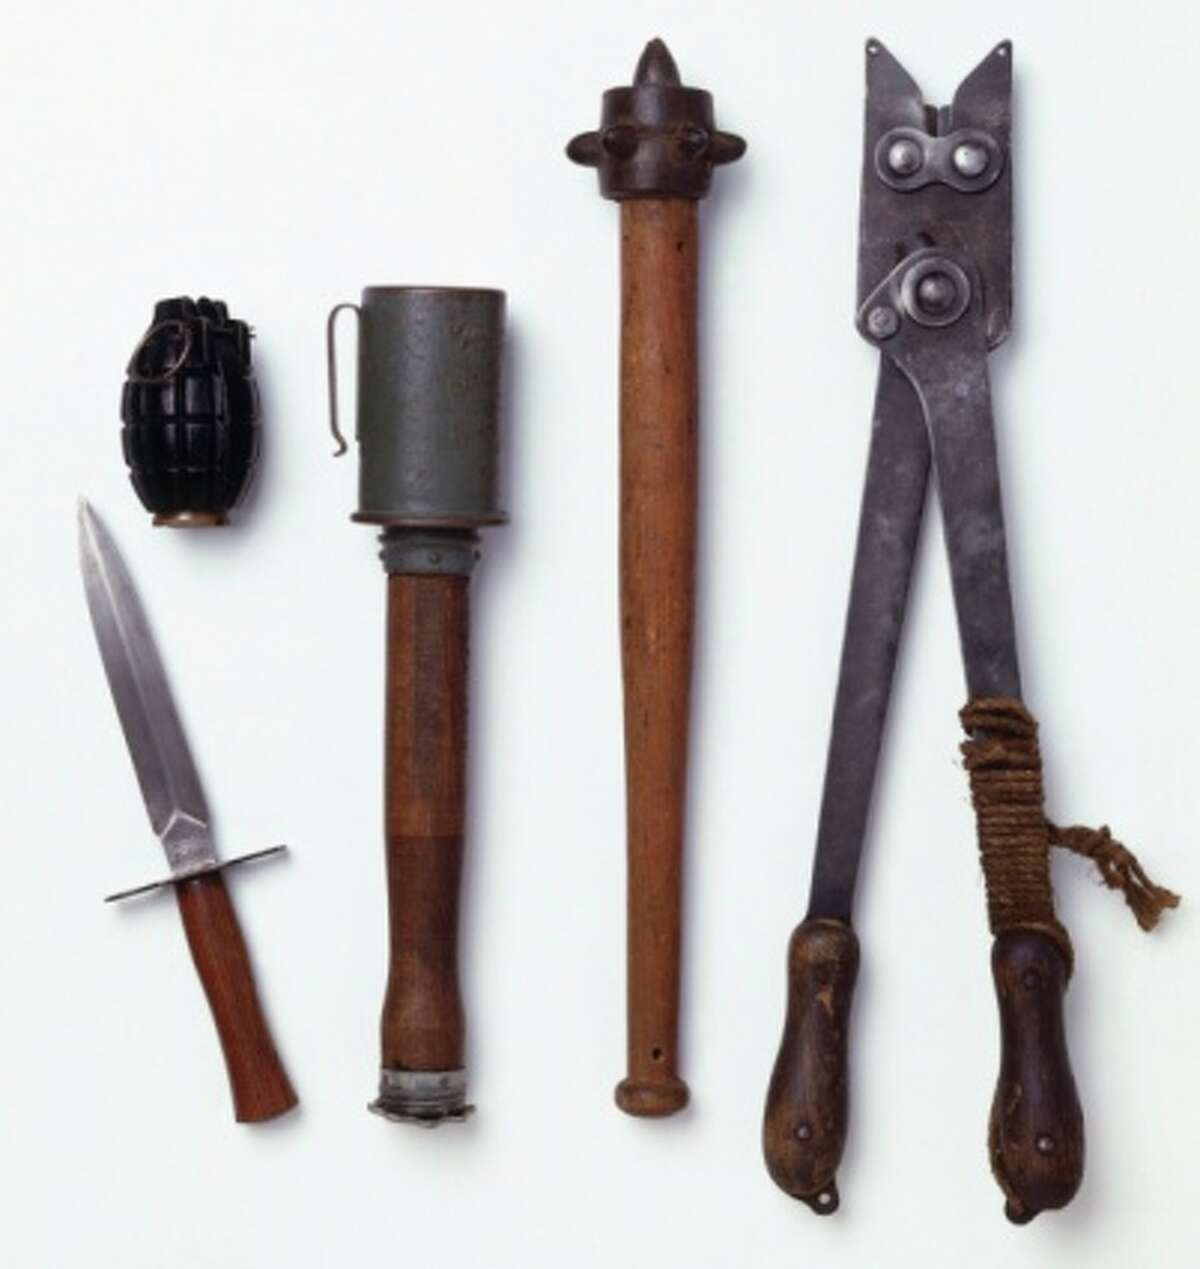 Weapons: Some of these, of course.